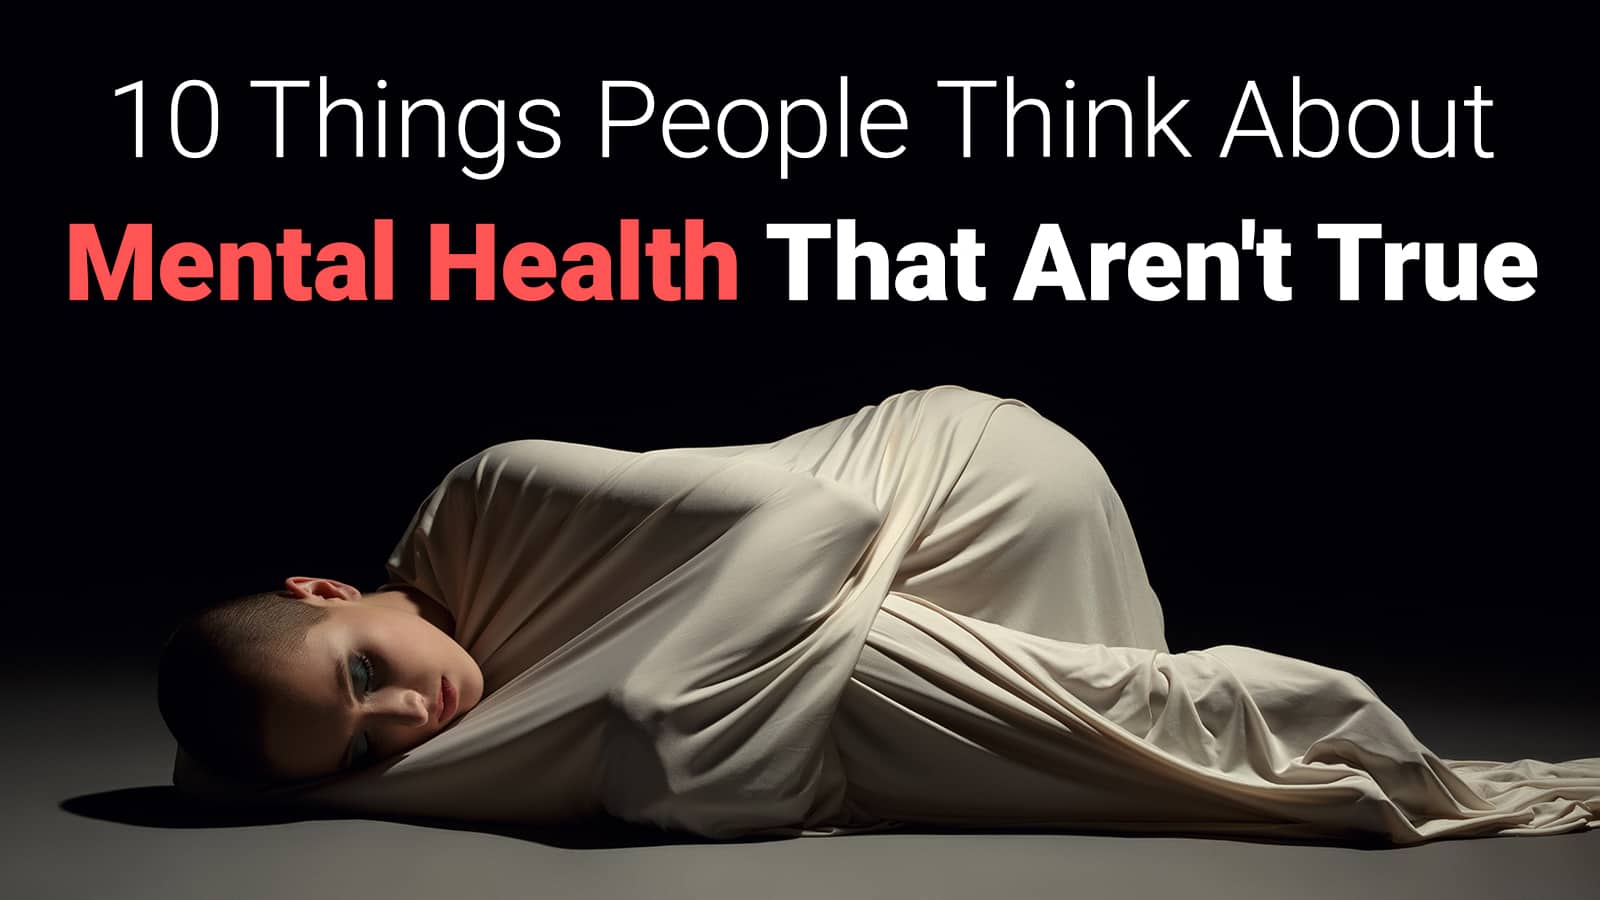 10 Things People Think About Mental Health That Aren’t True